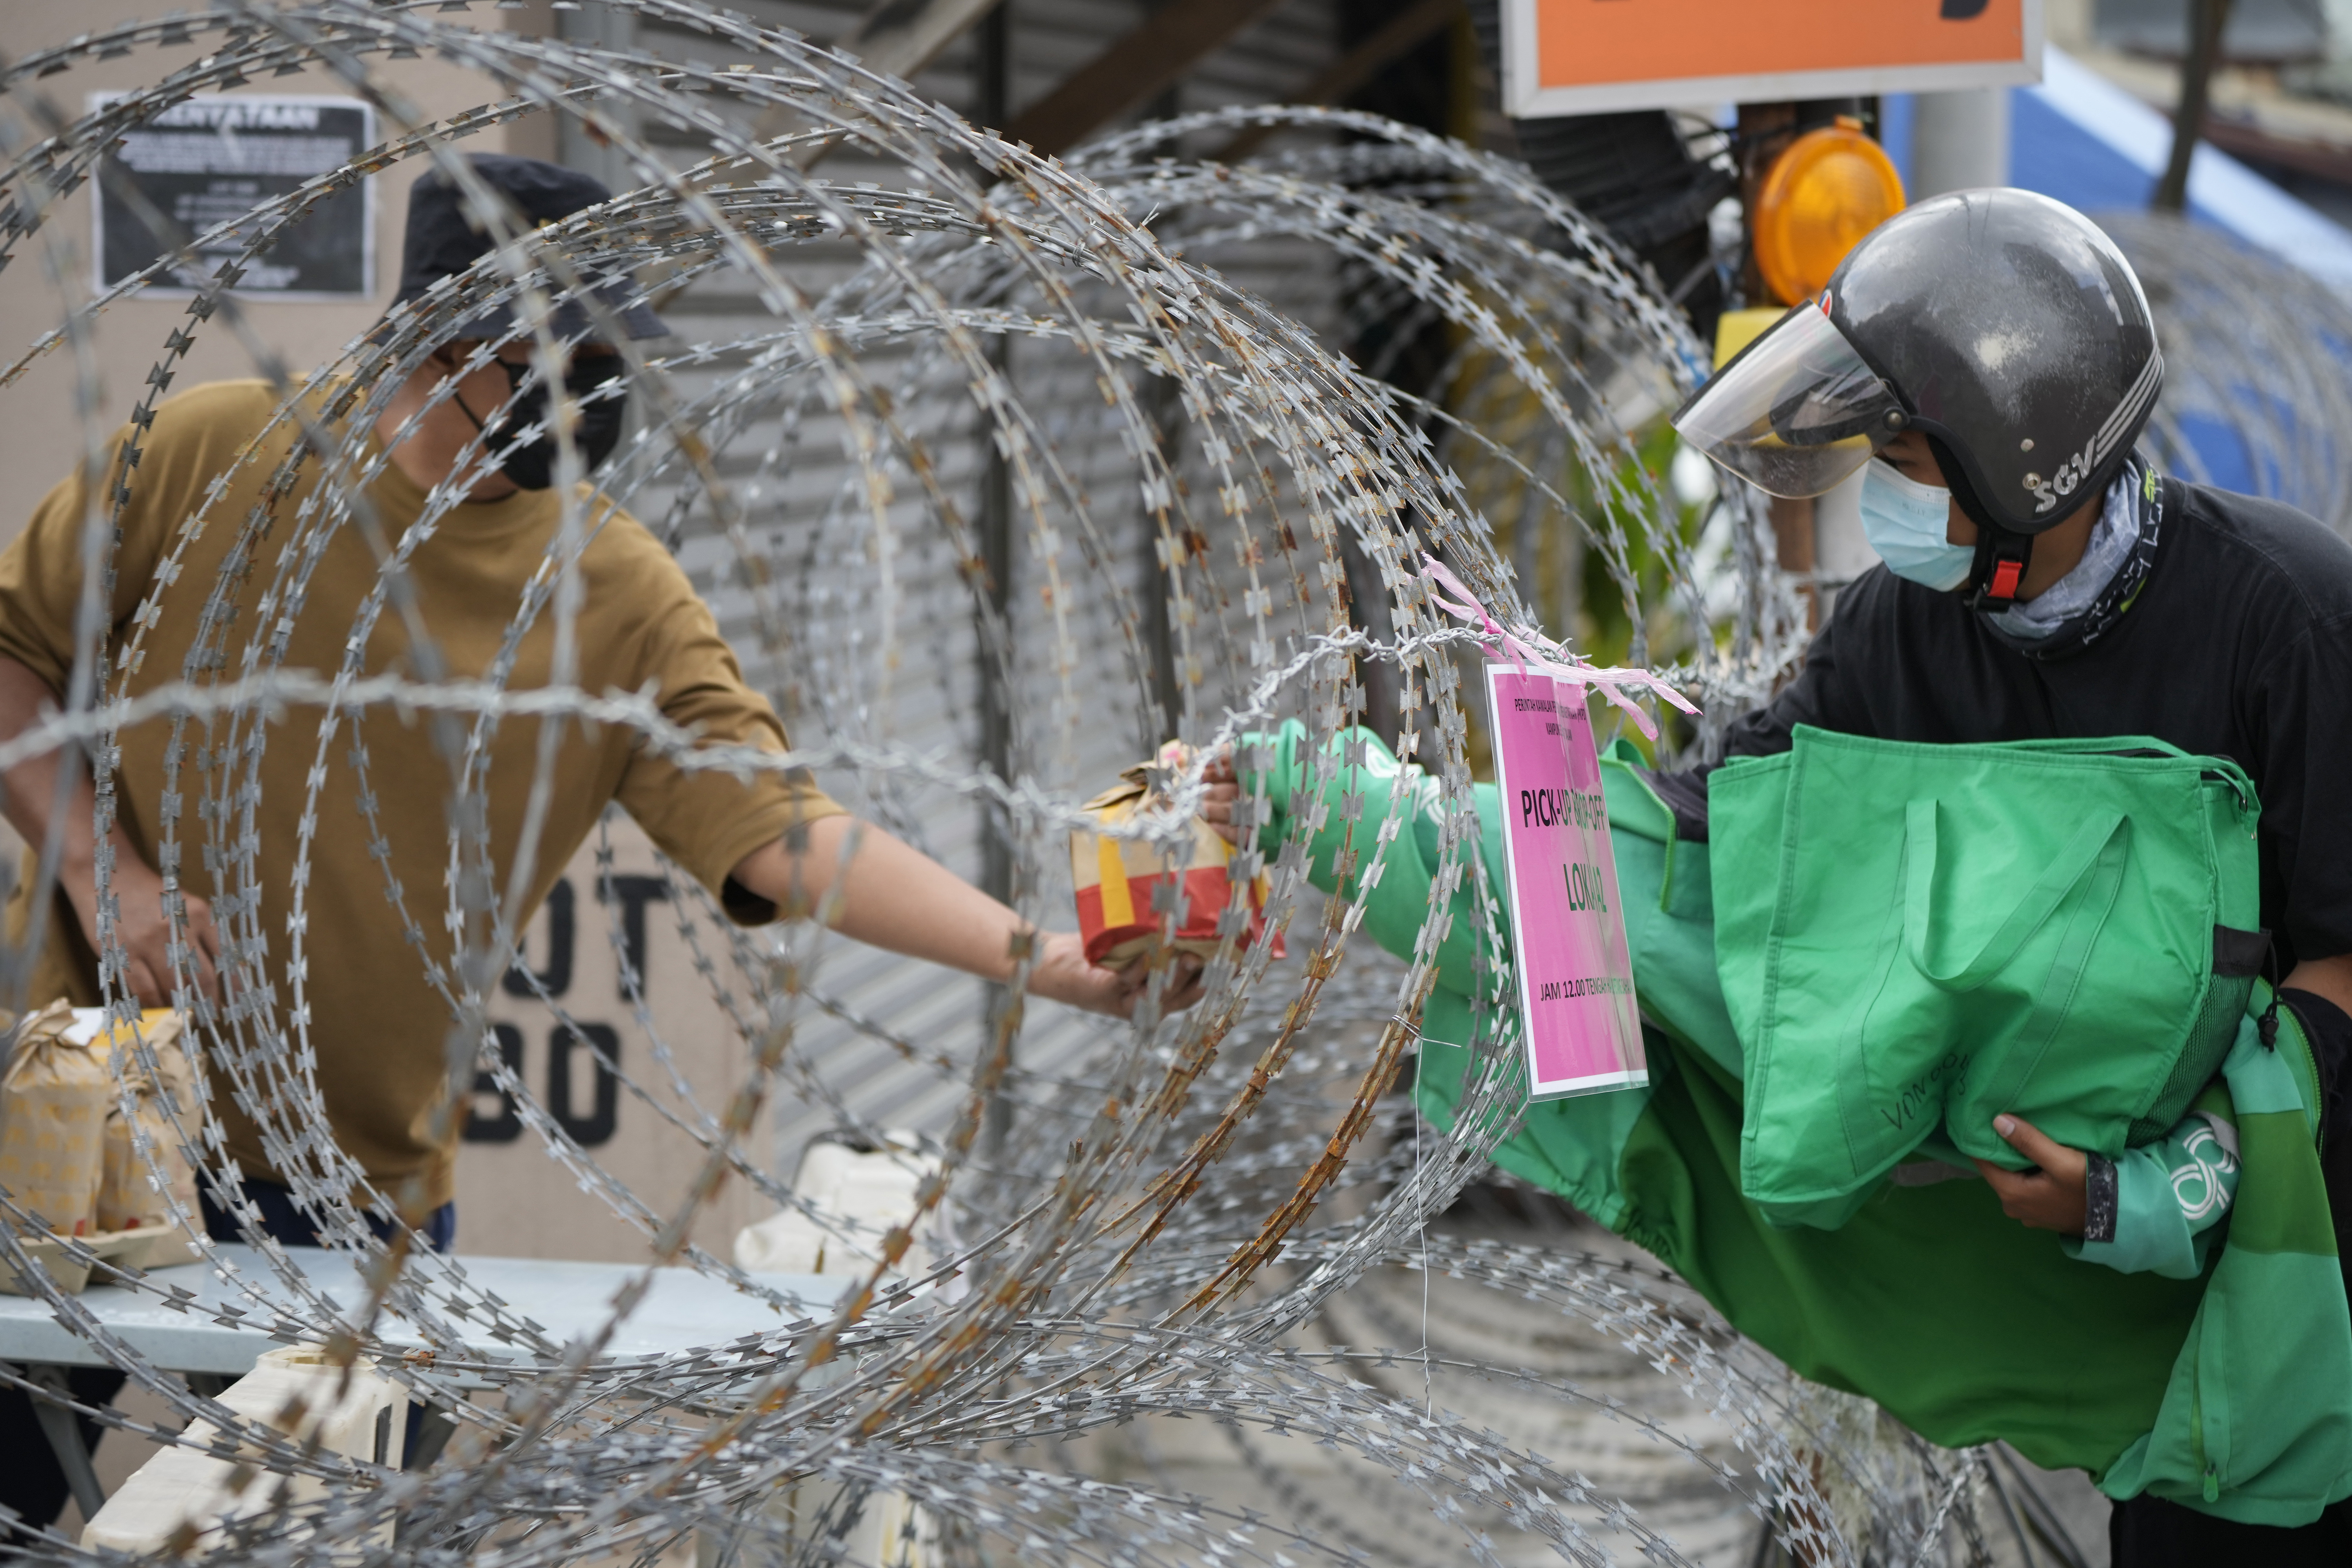 A resident in Kuala Lumpur receives food from a delivery rider through barbwire. Photo by Vincent Thian / AP